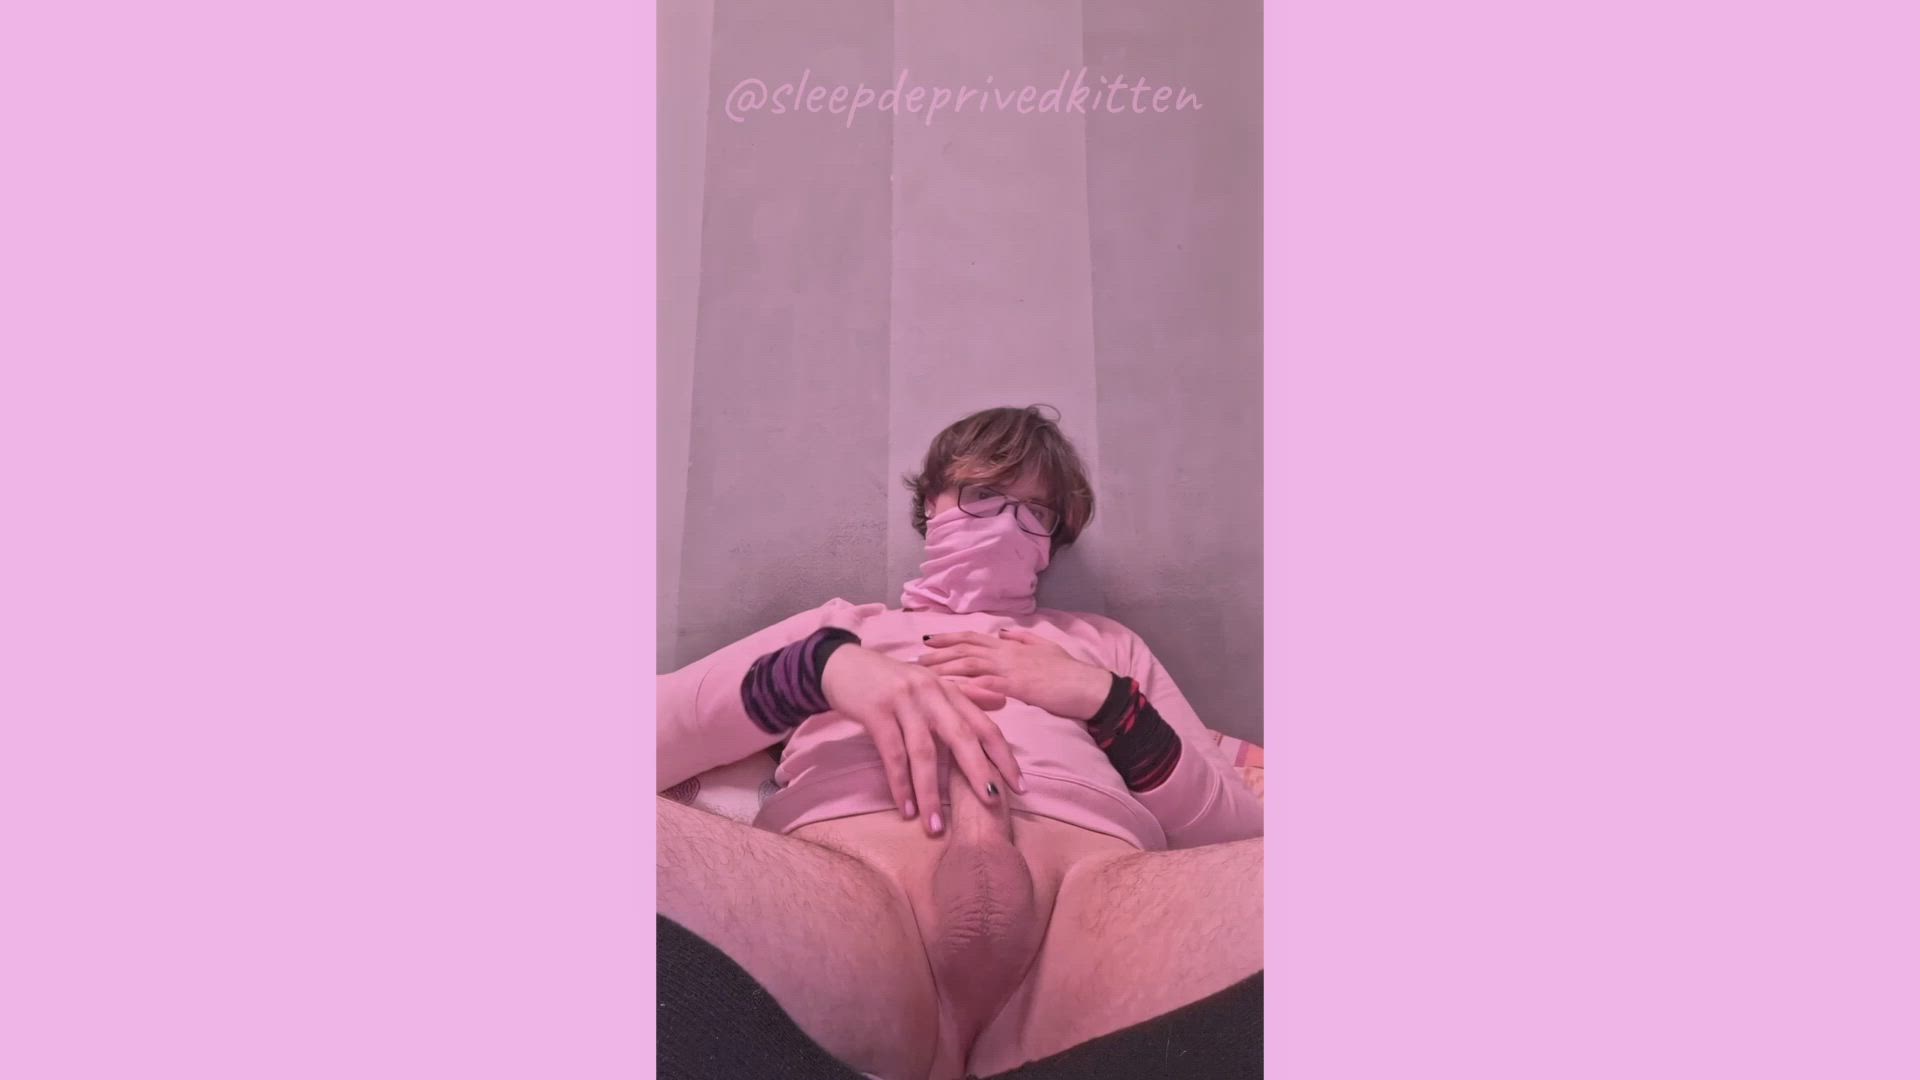 Big Dick porn video with onlyfans model sleepdeprivedkitten <strong>@sleepdeprivedkitten</strong>